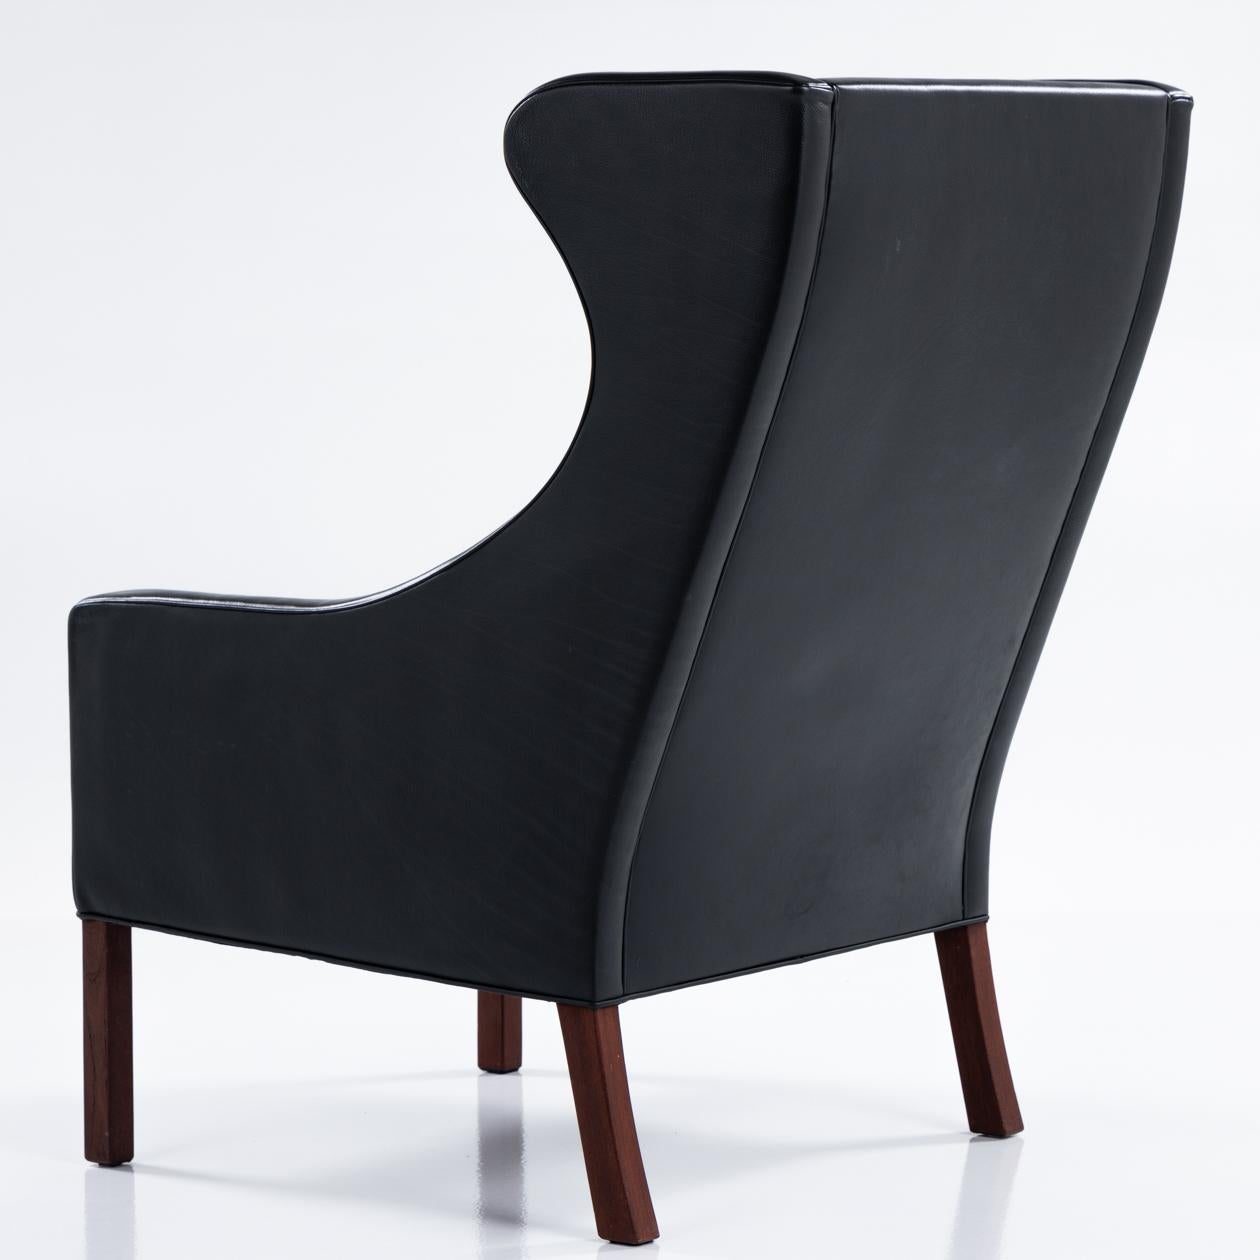 BM 2204 - The Wing back chair' in black leather and walnut legs. Børge Mogensen / Fredericia Furniture